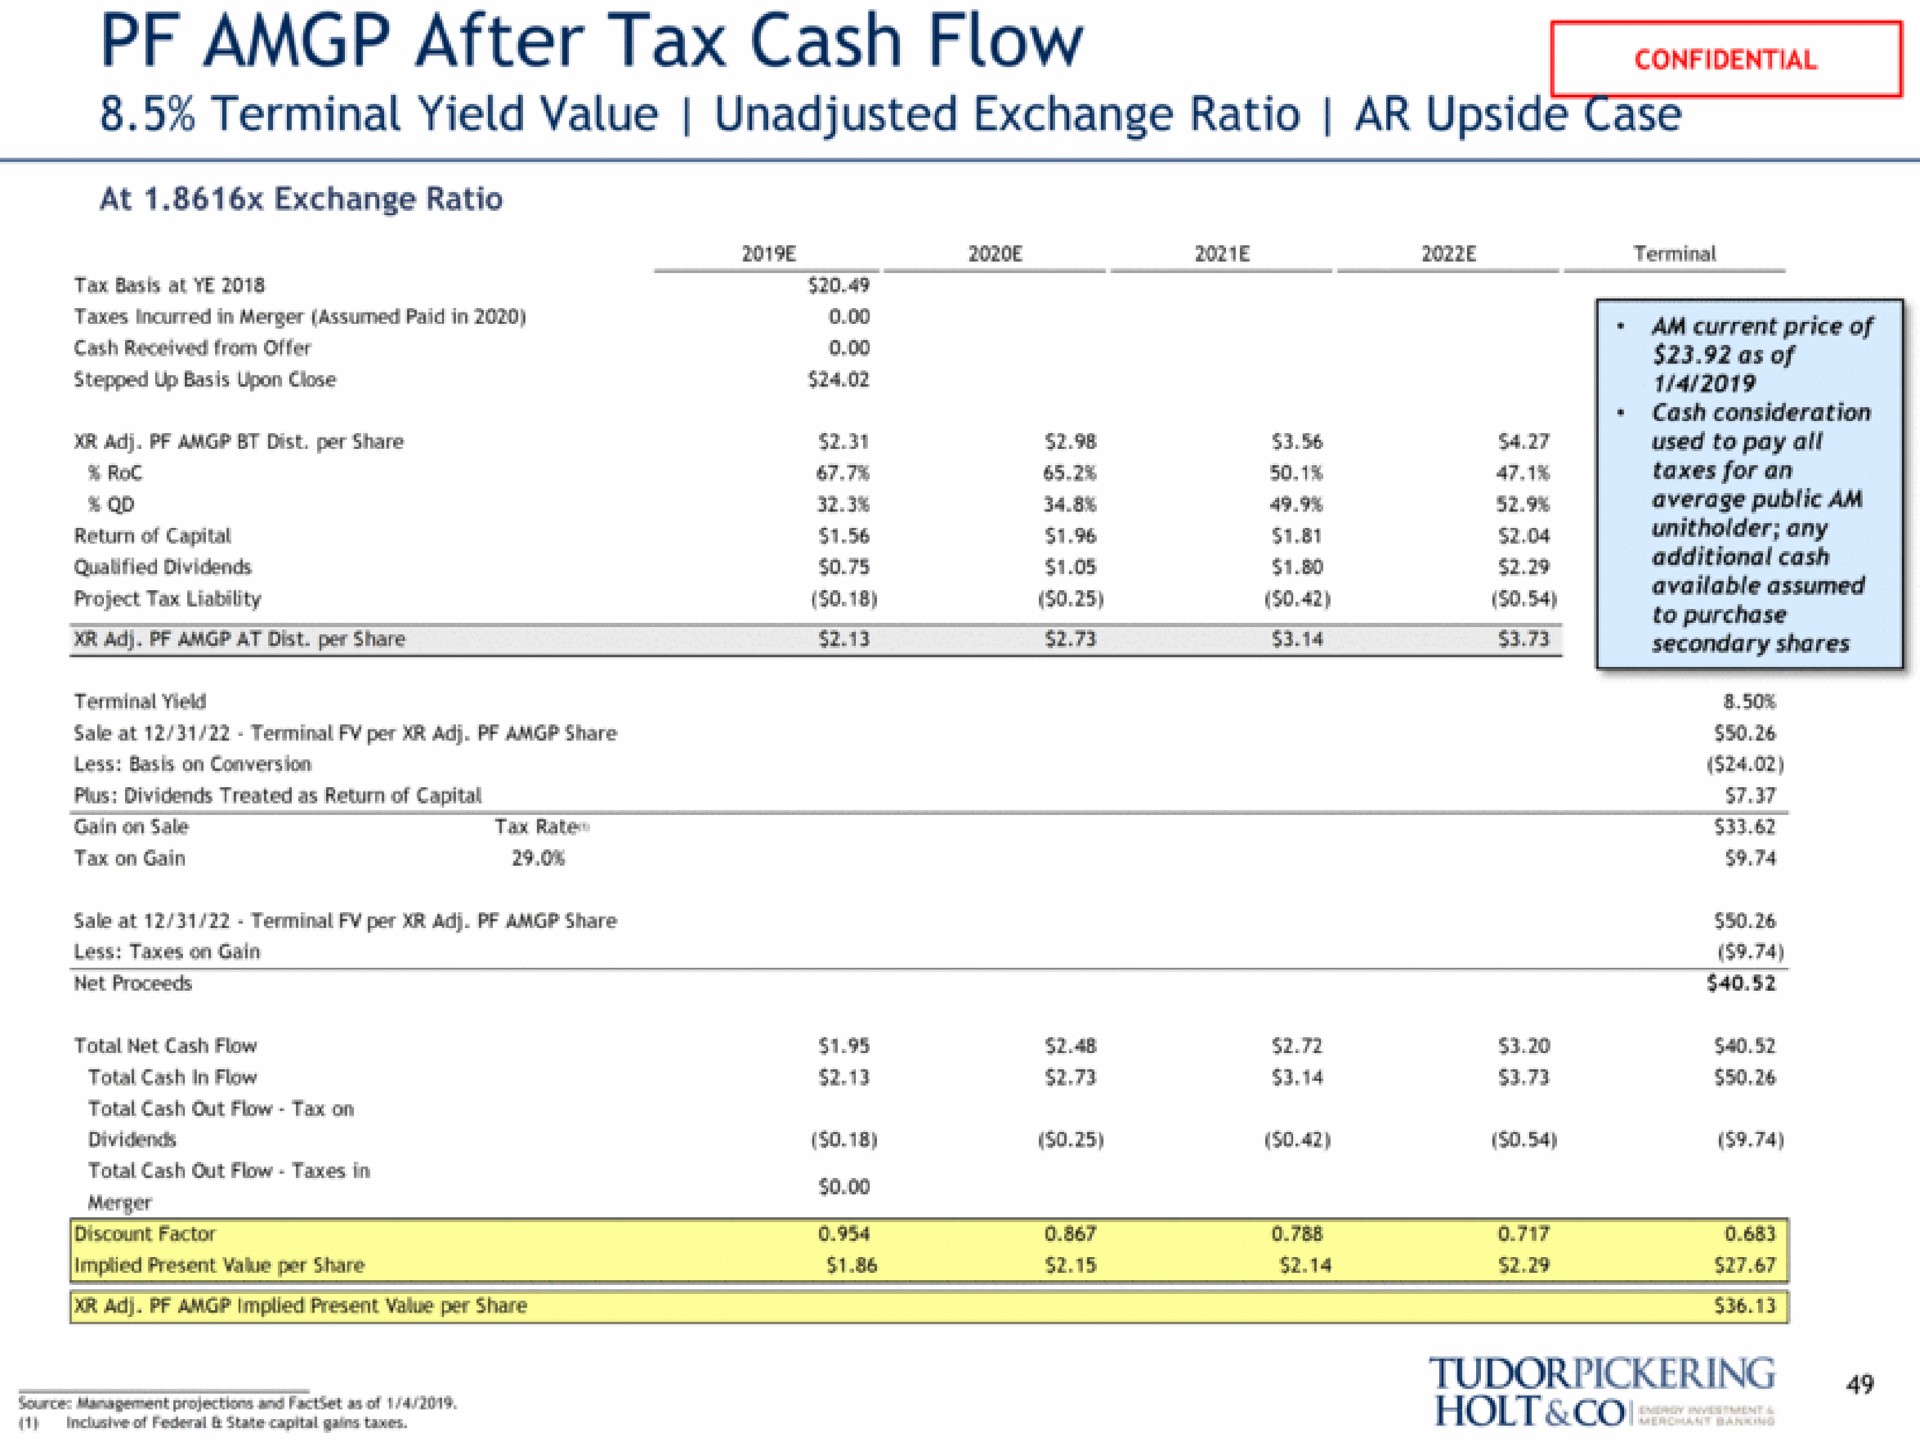 after tax cash flow terminal yield value unadjusted exchange ratio upside case | Tudor, Pickering, Holt & Co